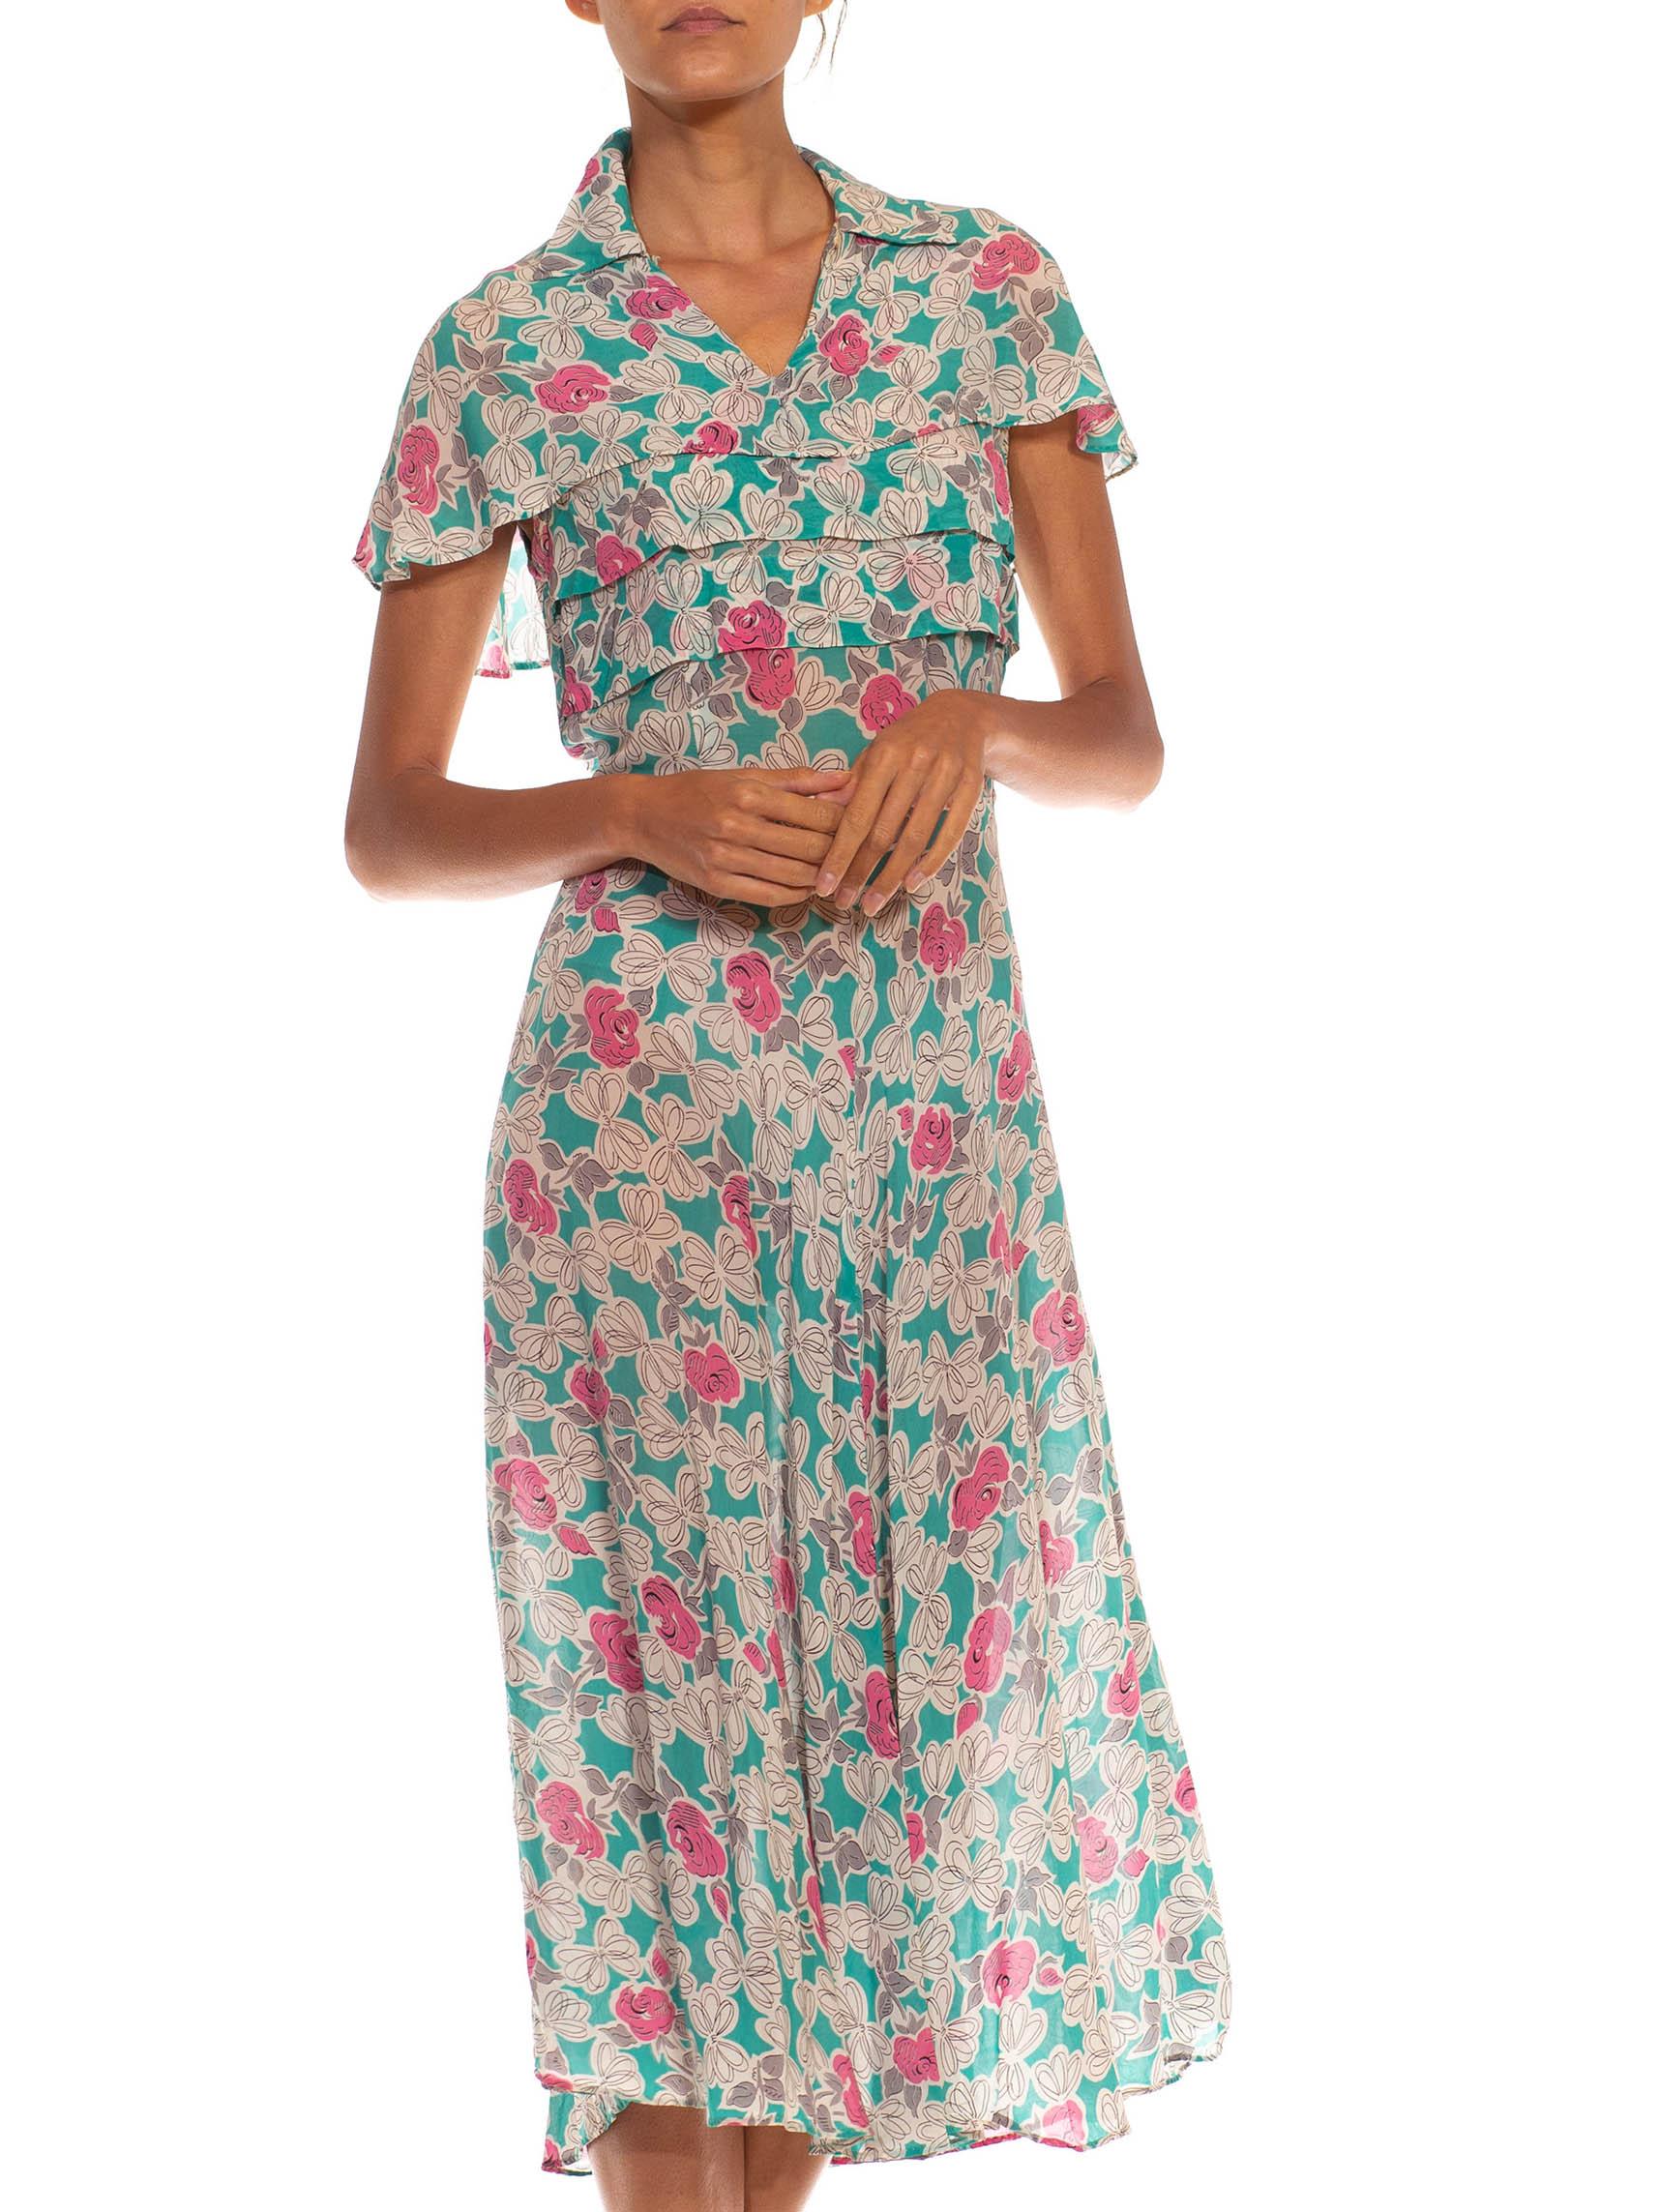 1940S Teal & White Floral Print Rayon Chiffon Dress In Excellent Condition For Sale In New York, NY